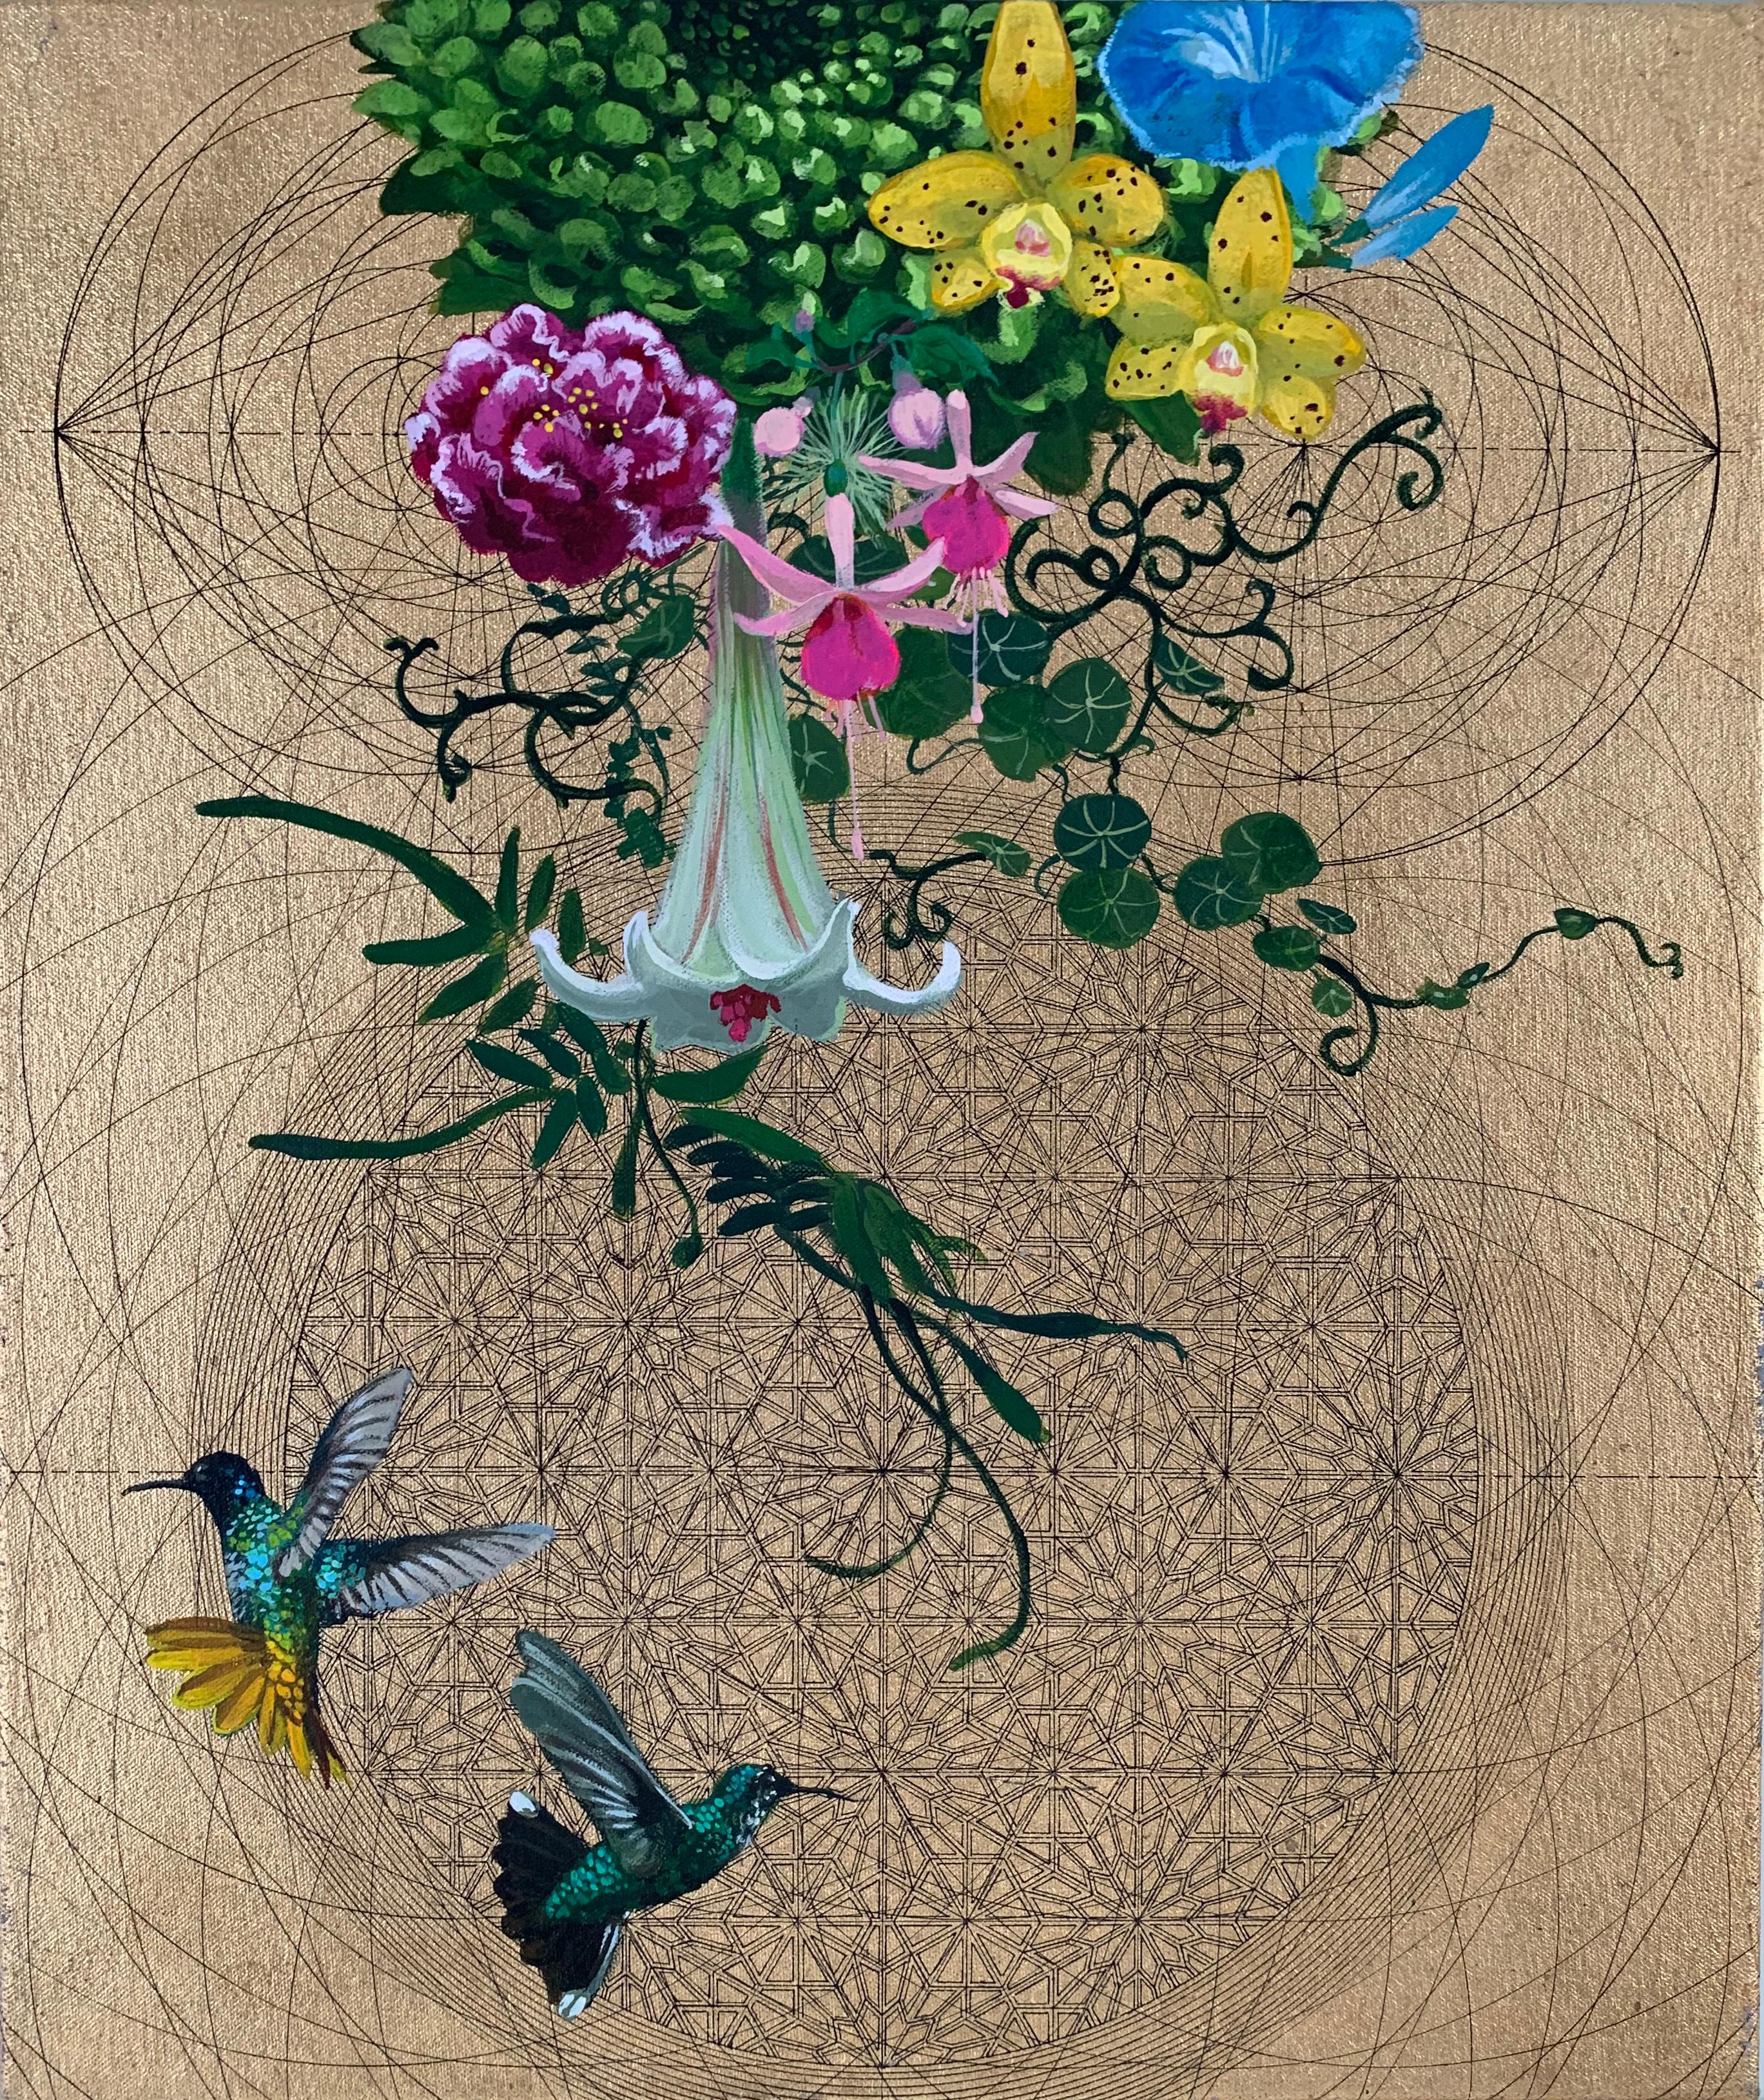 Emas 19 - contemporary collaborative decorative floral ornamental painting - Painting by Keng Wai Lee & Marco Araldi